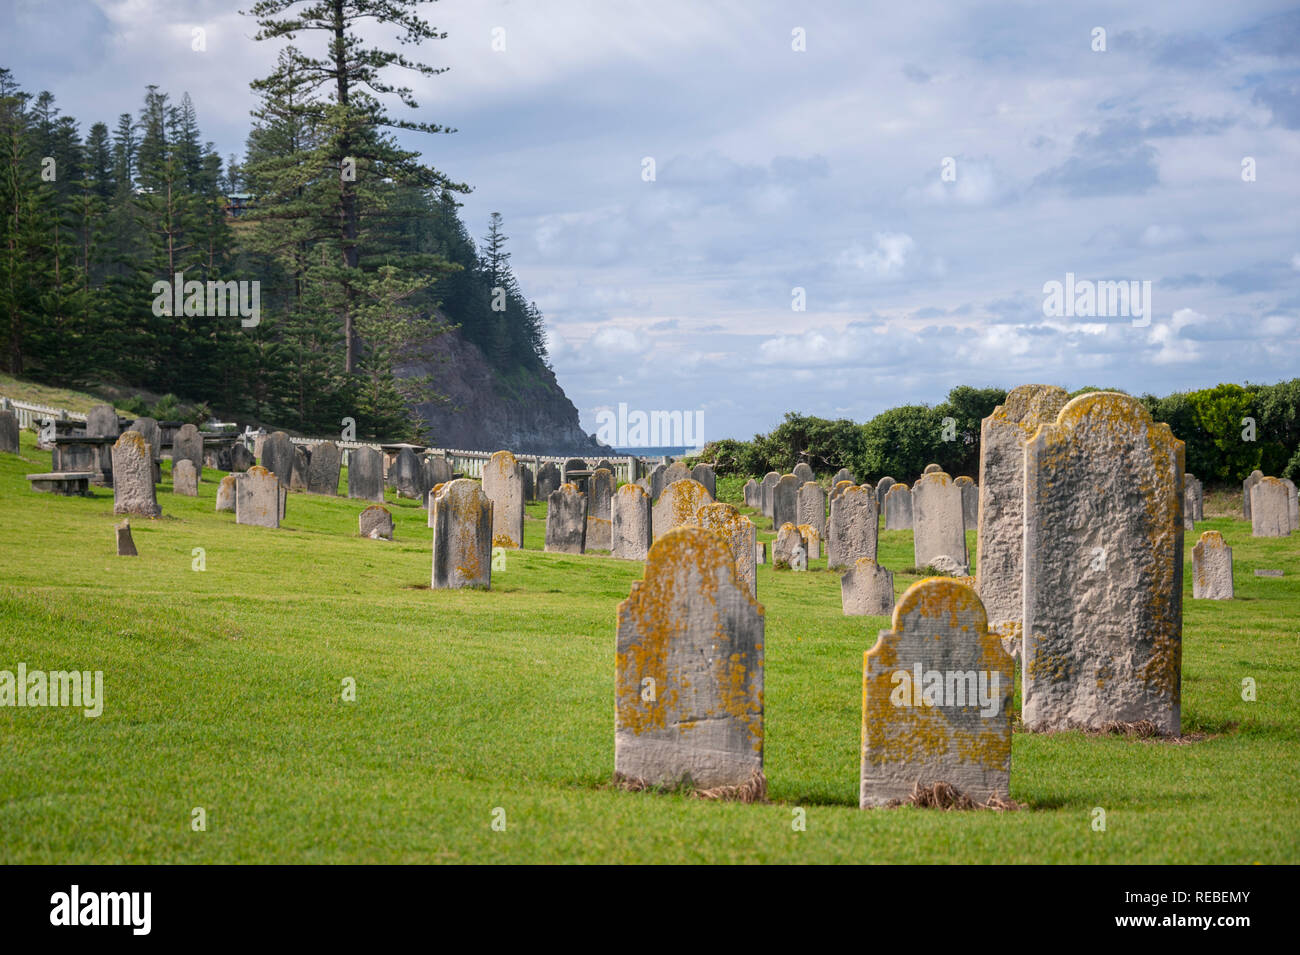 Ancient cemetery with old lichen encrusted head stones, Norfolk Island Australia Stock Photo